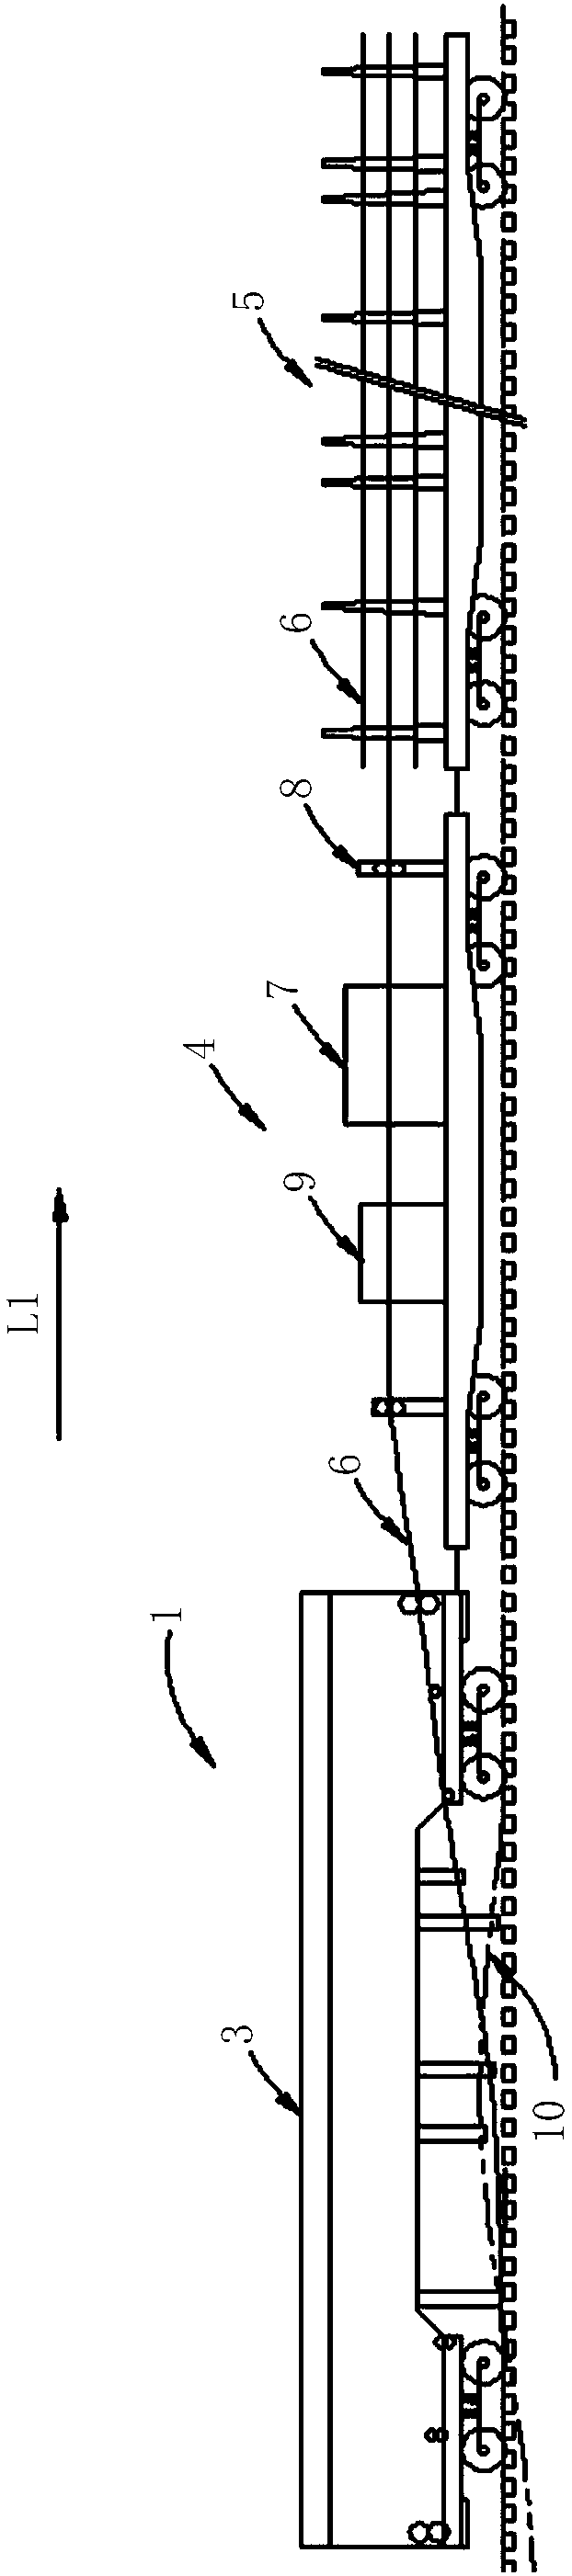 A kind of rail-changing train operation method